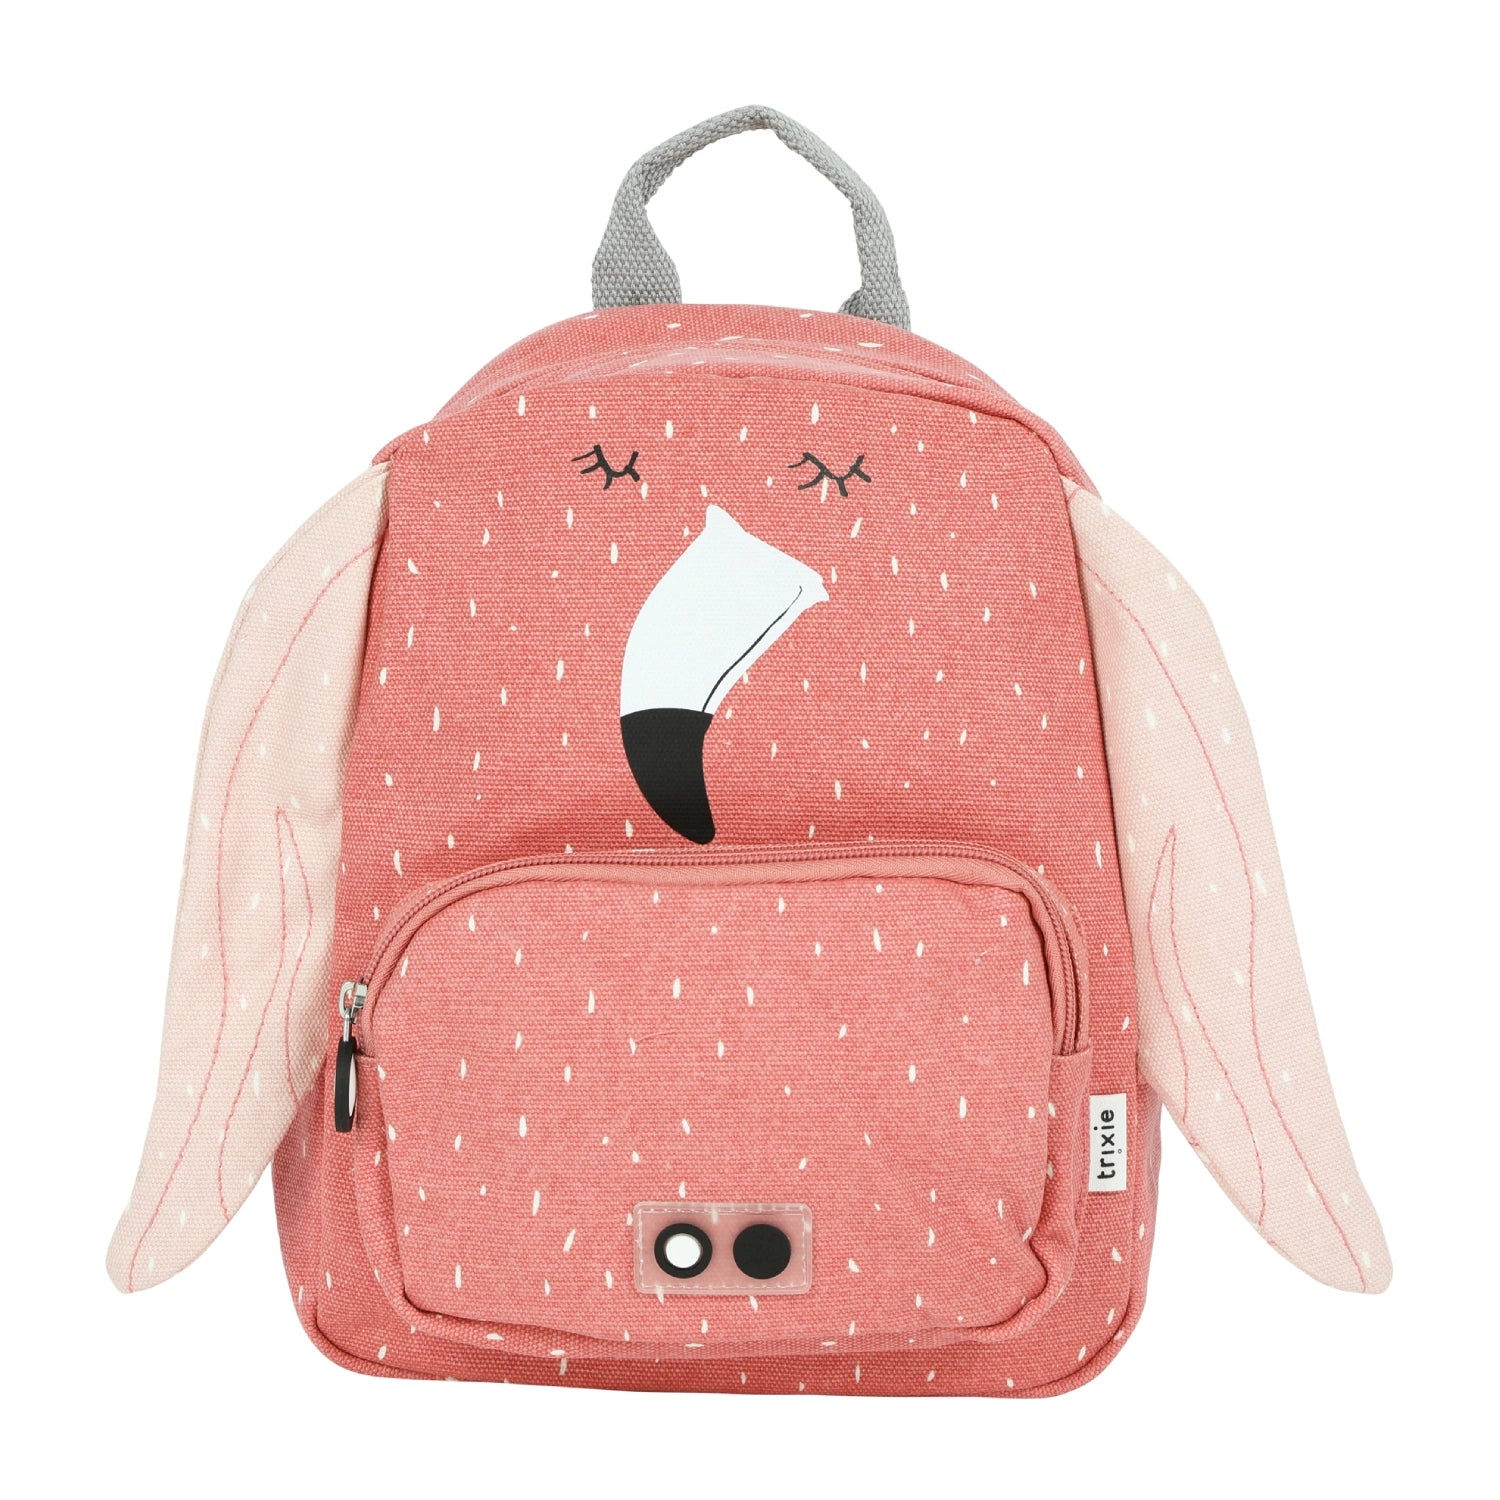 An image of Kids School Backpack - Trixie Bag Collection Mrs. Flamingo